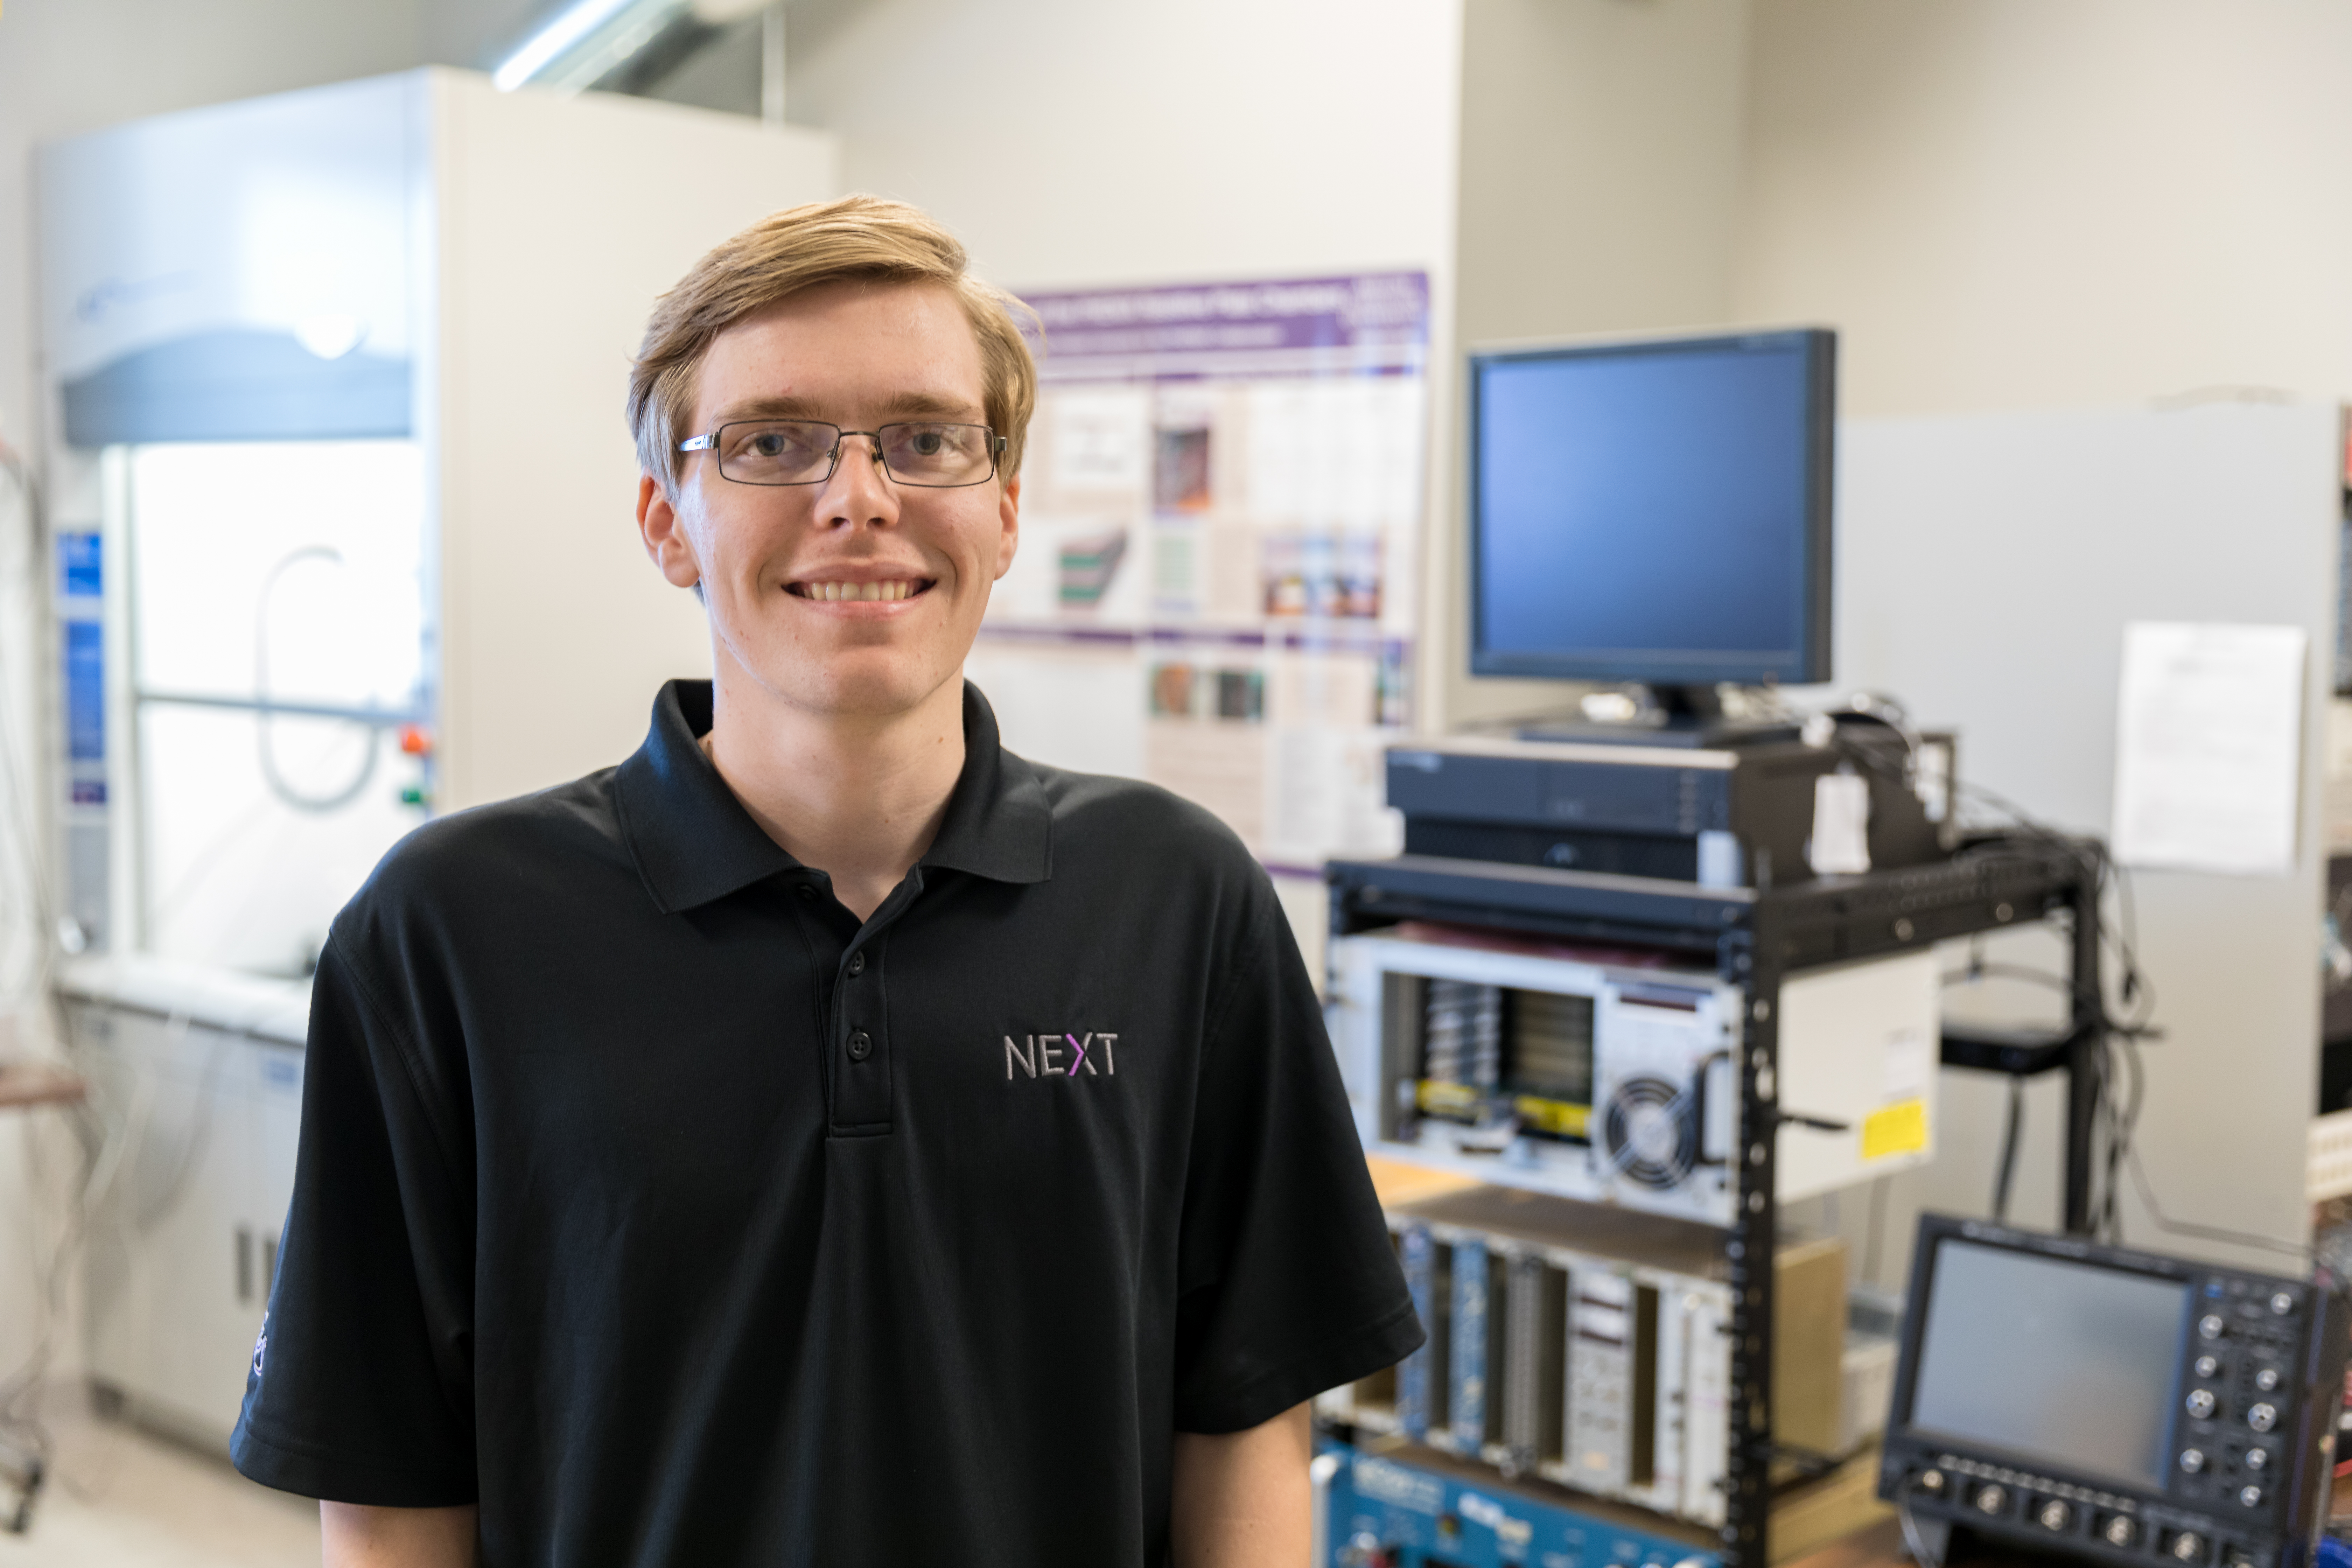 Caleb Hicks has conducted research at Fermi National Accelerator Laboratory near Chicago, Los Alamos National Laboratory in New Mexico, and now ACU's new Nuclear Energy eXperimental Testing (NEXT) Lab.